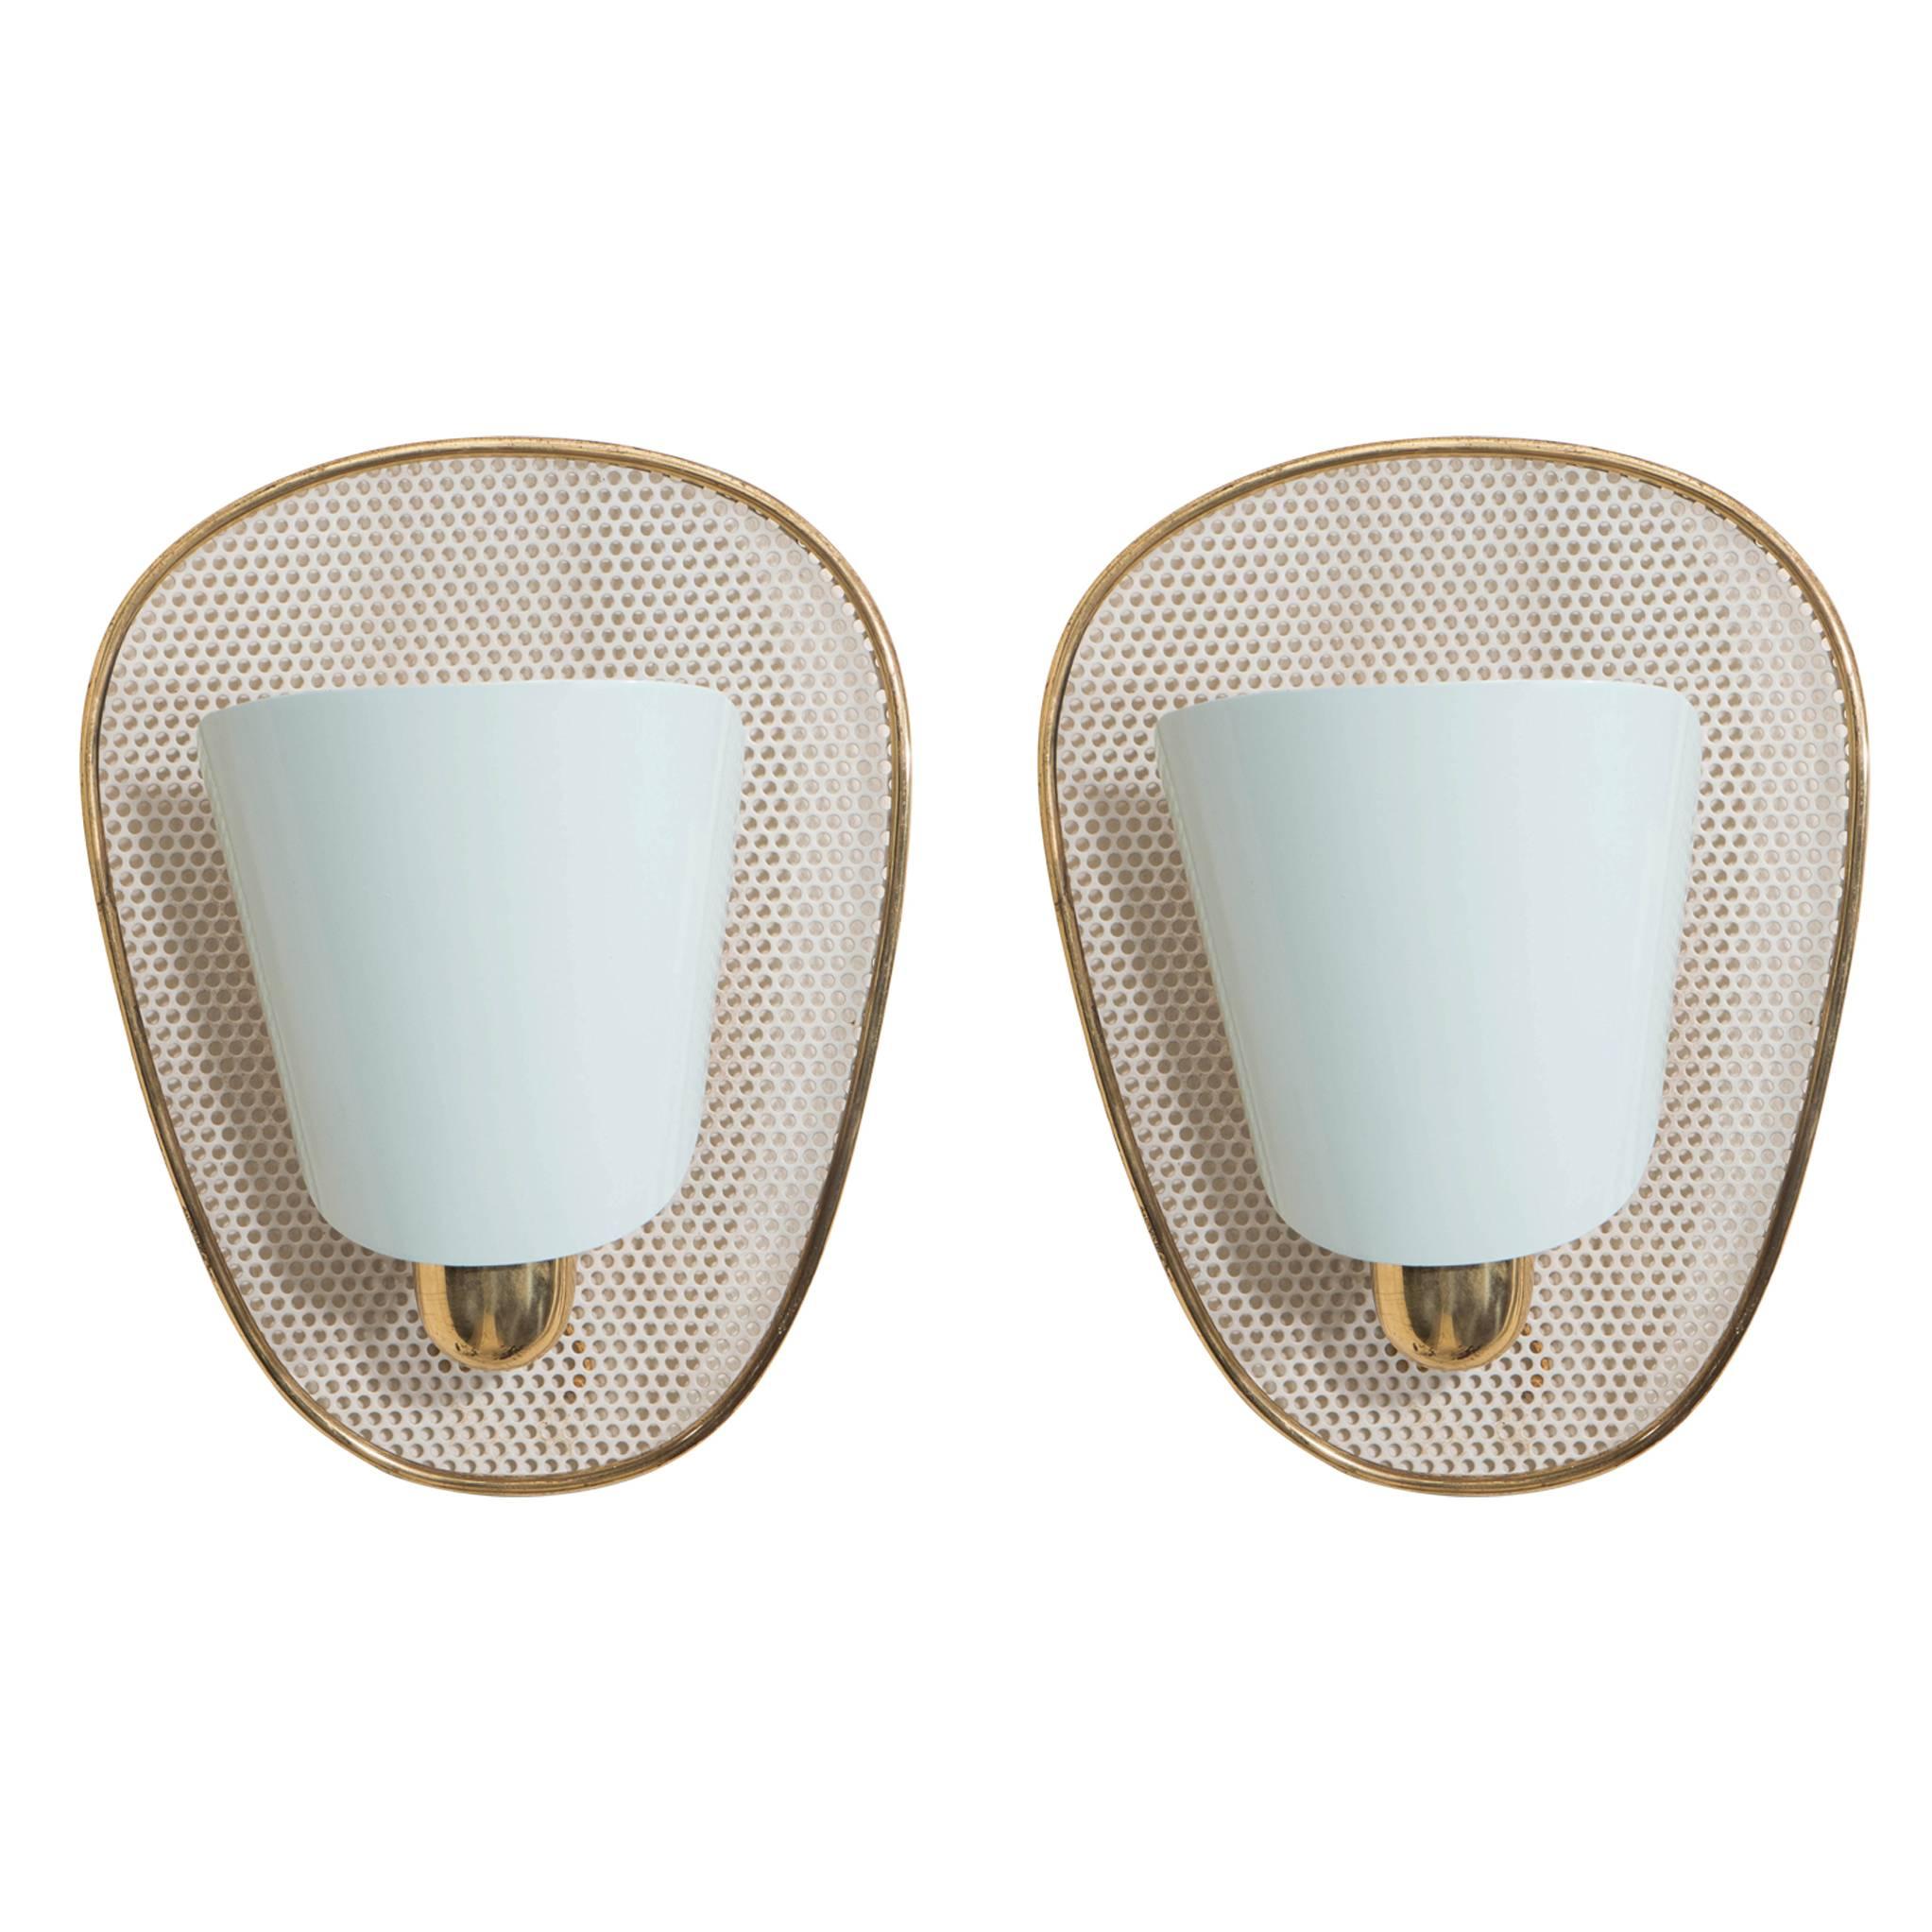 Pair of BAG Turgi Swiss Wall Sconces with Enameled Shades